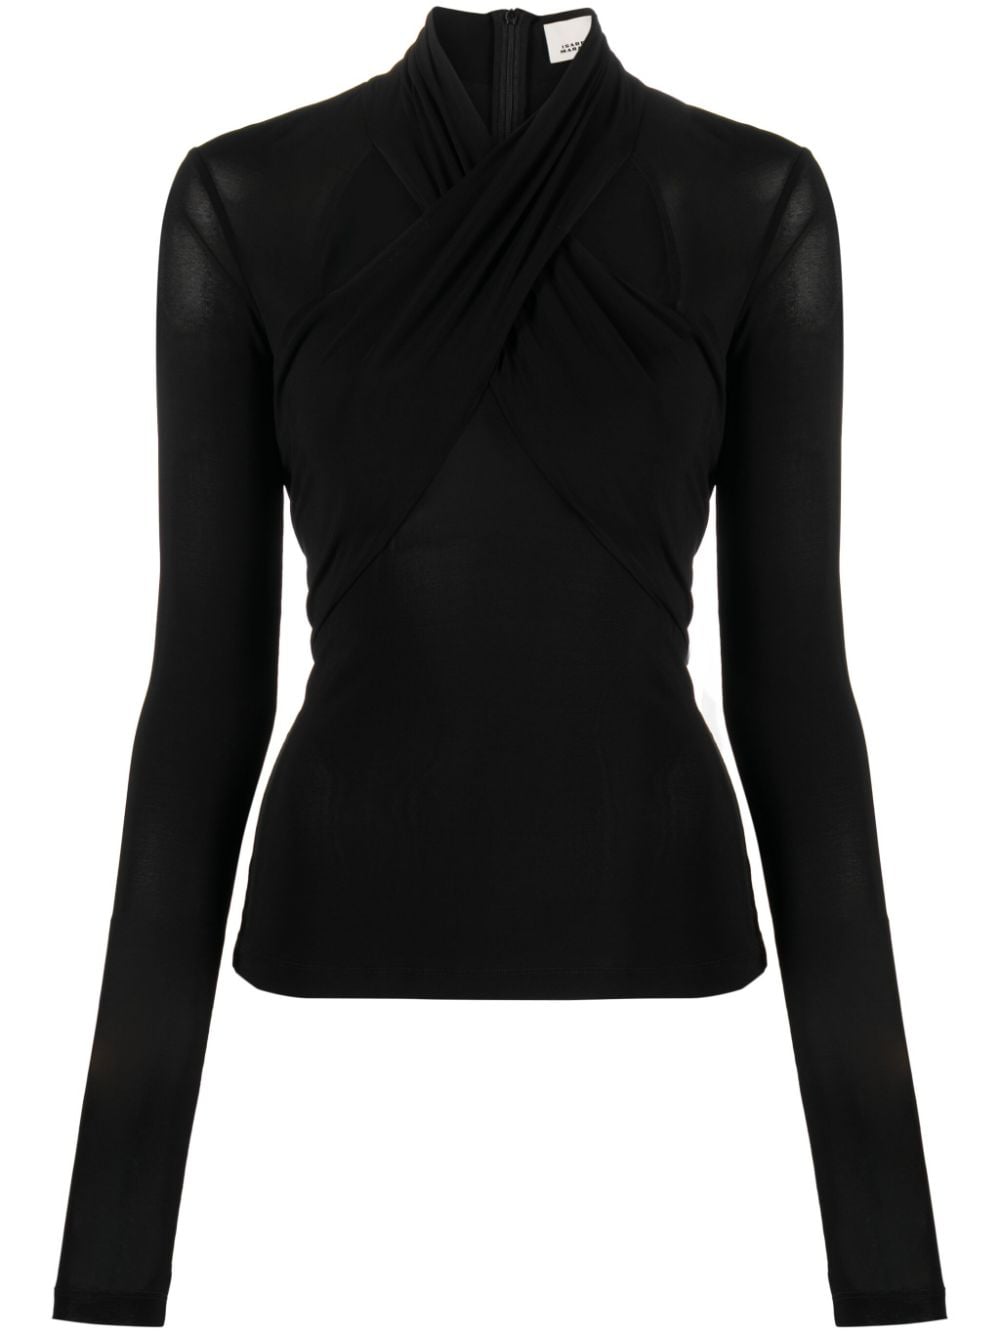 ISABEL MARANT Resly cut-out jersey top - Black von ISABEL MARANT